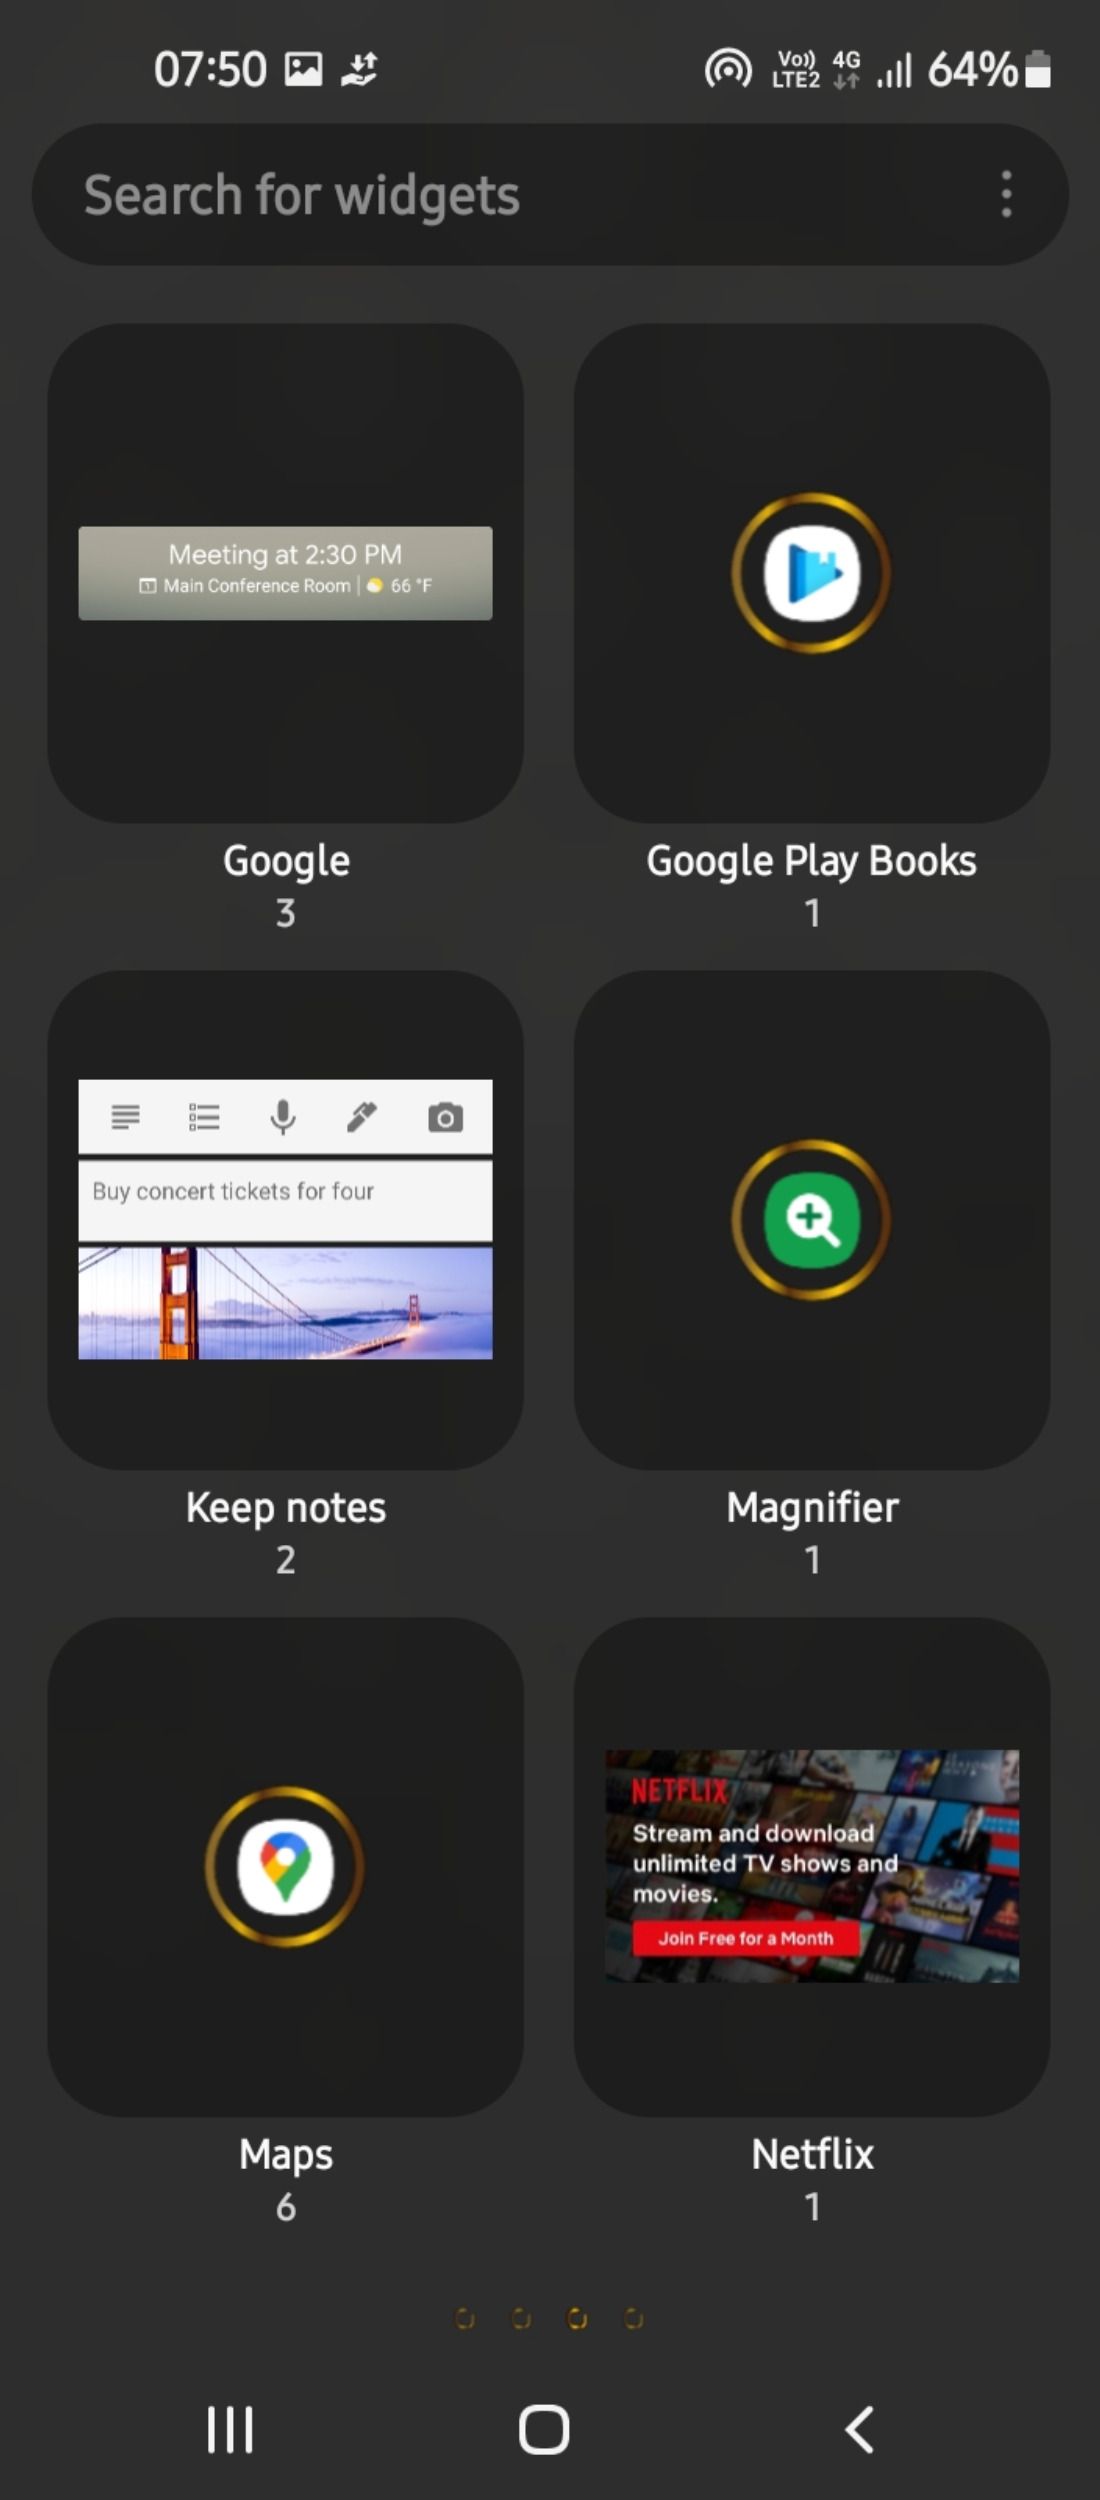 App shortcuts and widgets for frequently used apps